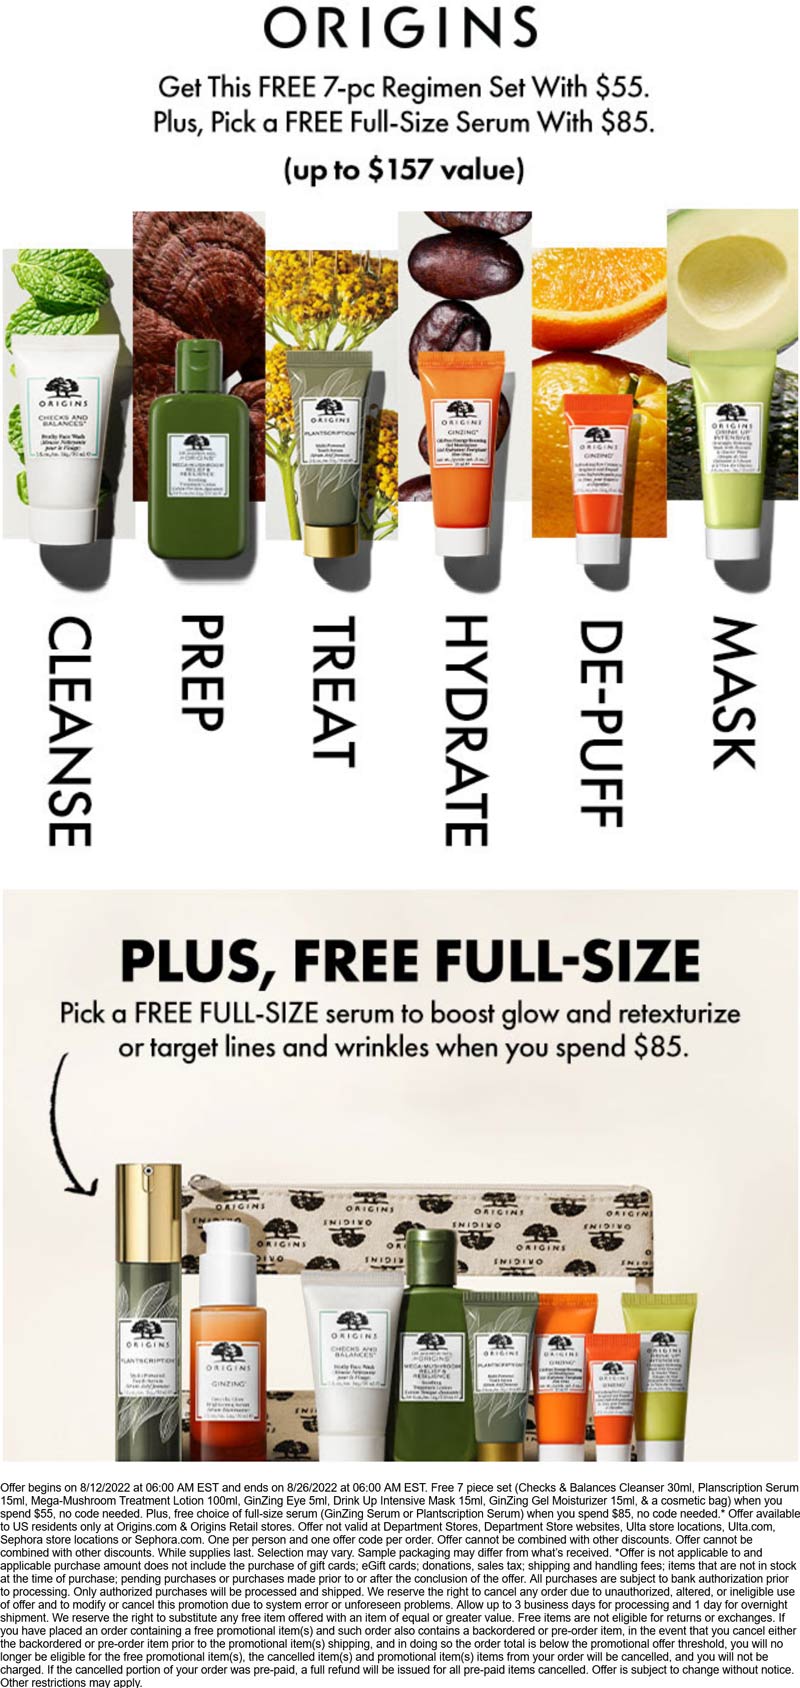 Origins stores Coupon  Free 7pc on $55 and another full size on $85 at Origins, ditto online #origins 